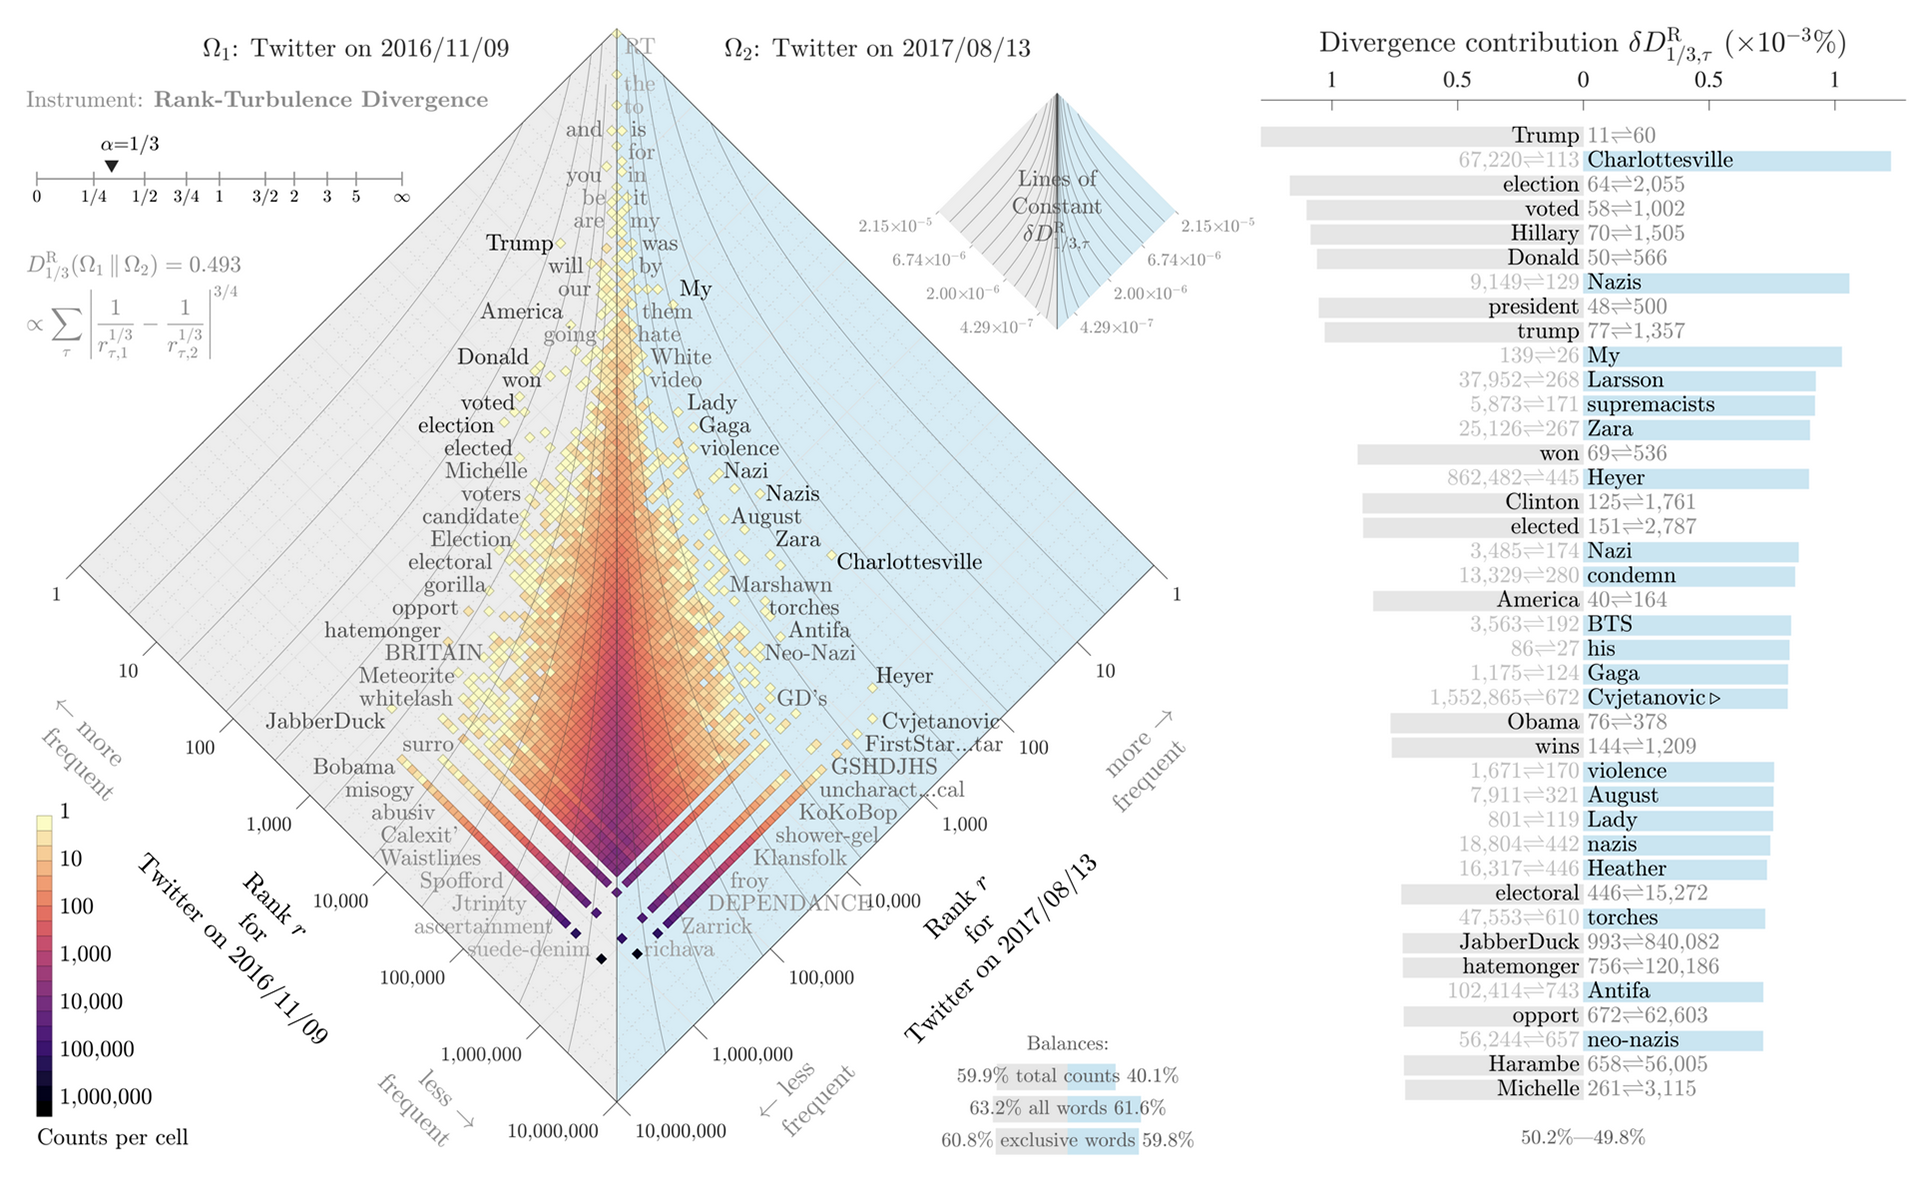 A diamond oriented heatmap showing linguistic divergences between two days on twitter. On the election day, more common words include Trump, election, Donald, america, elected. On the right, more commonly used words include nazi, charlottesville, violence, antifa, and lady gaga.